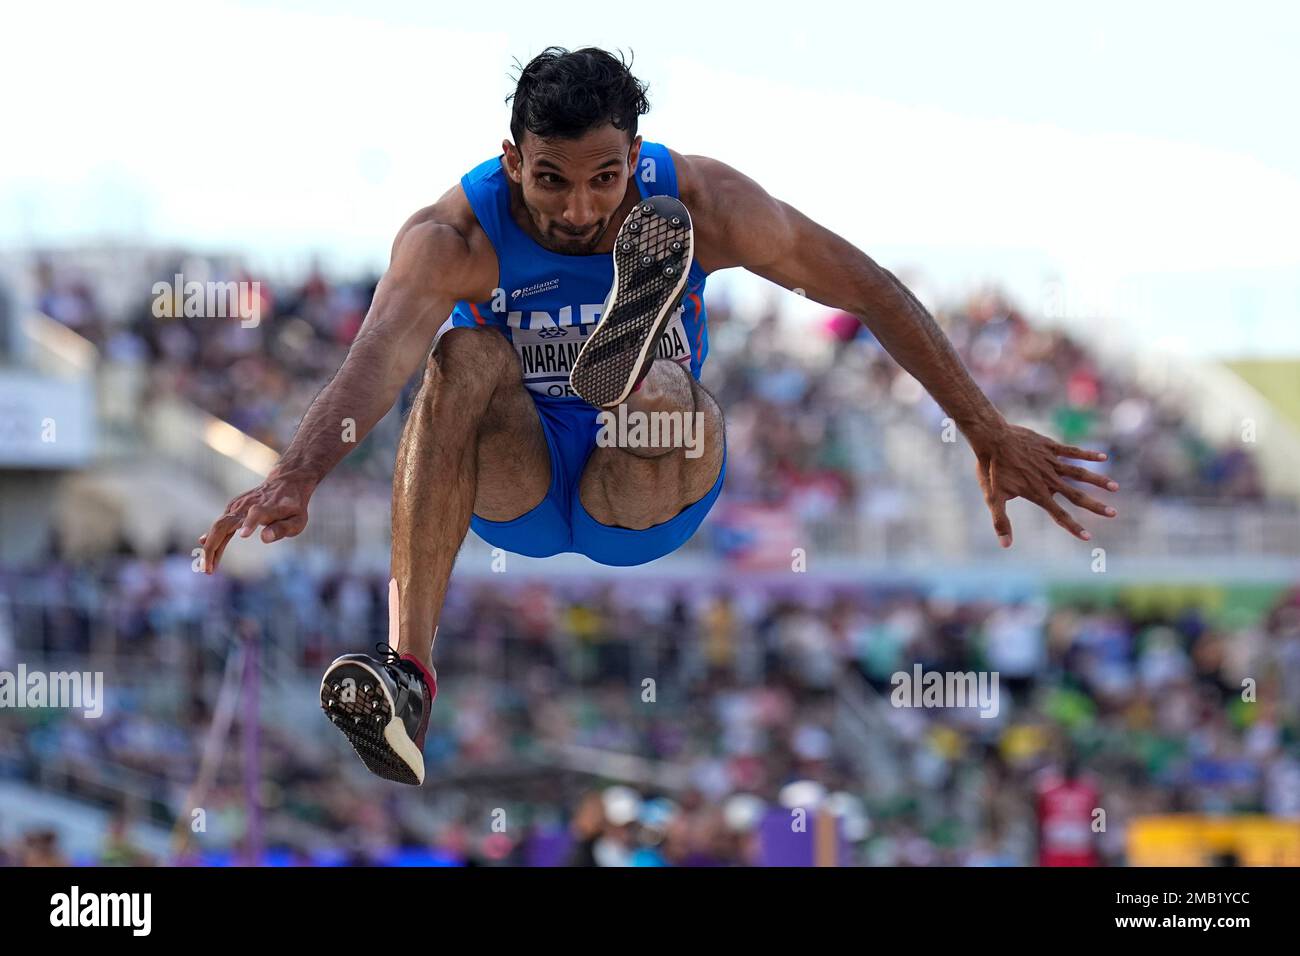 Abdulla Aboobacker Narangolintevida, of India, competes during  qualifications for the men's triple jump at the World Athletics  Championships on Thursday, July 21, 2022, in Eugene, Ore. (AP Photo/Gregory  Bull Stock Photo - Alamy